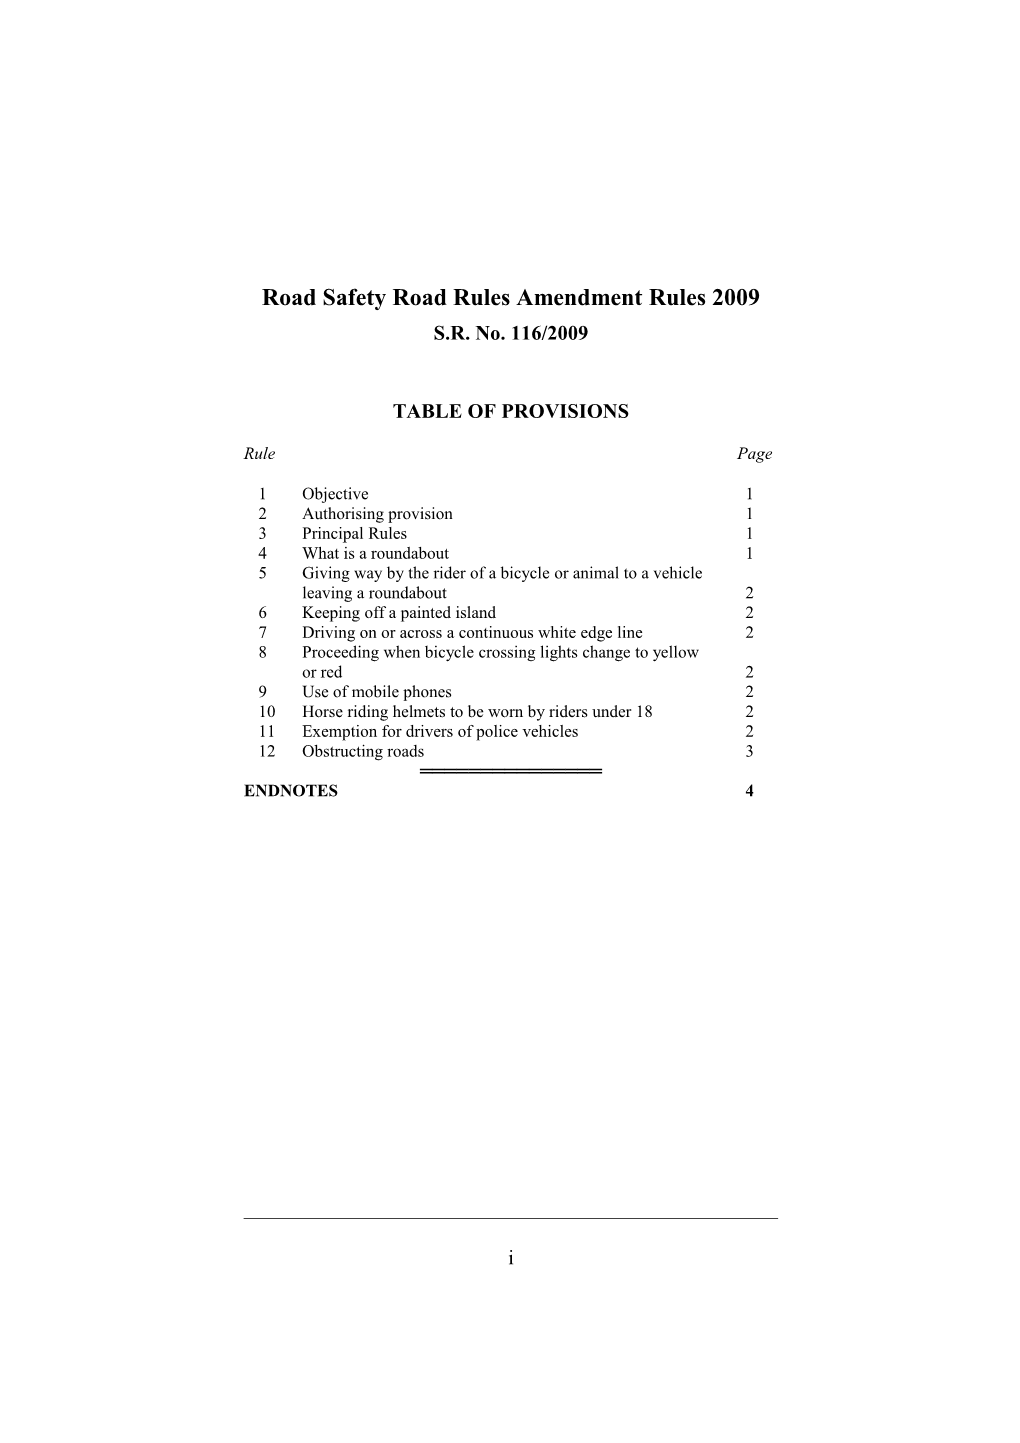 Road Safety Road Rules Amendment Rules 2009